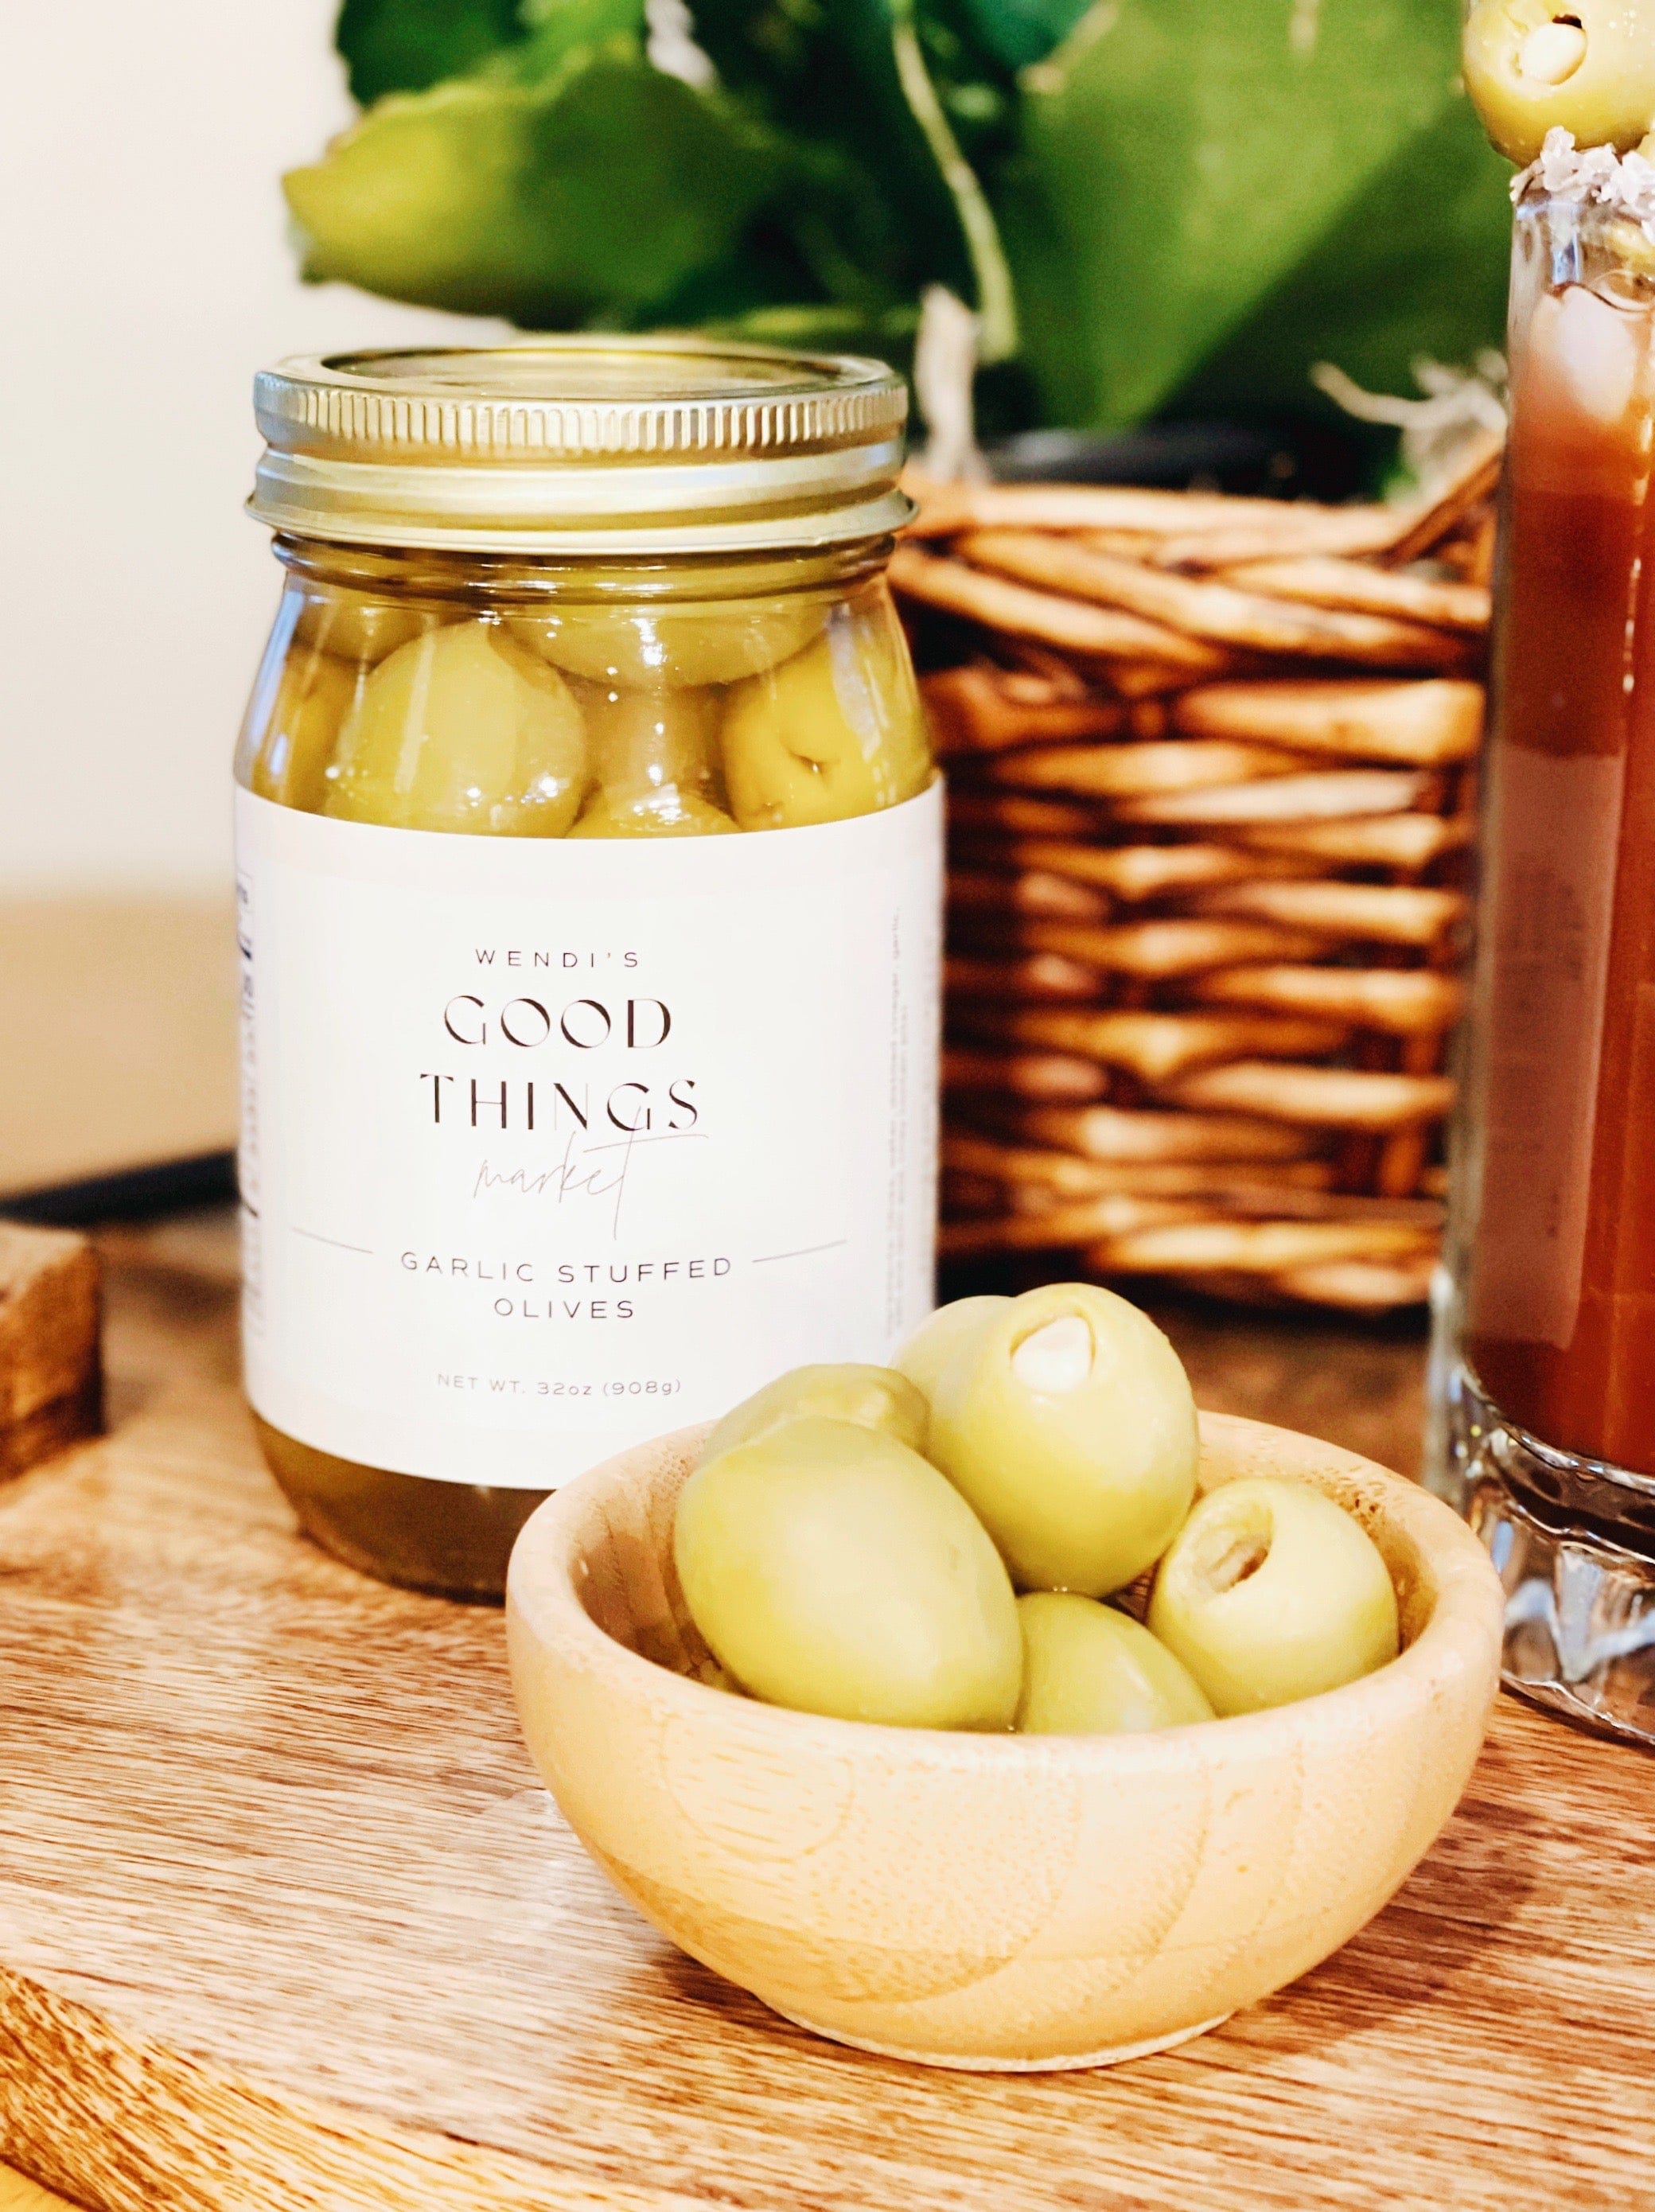 garlic stuffed olives, made in Colorado, Wendi's Good Things Market 